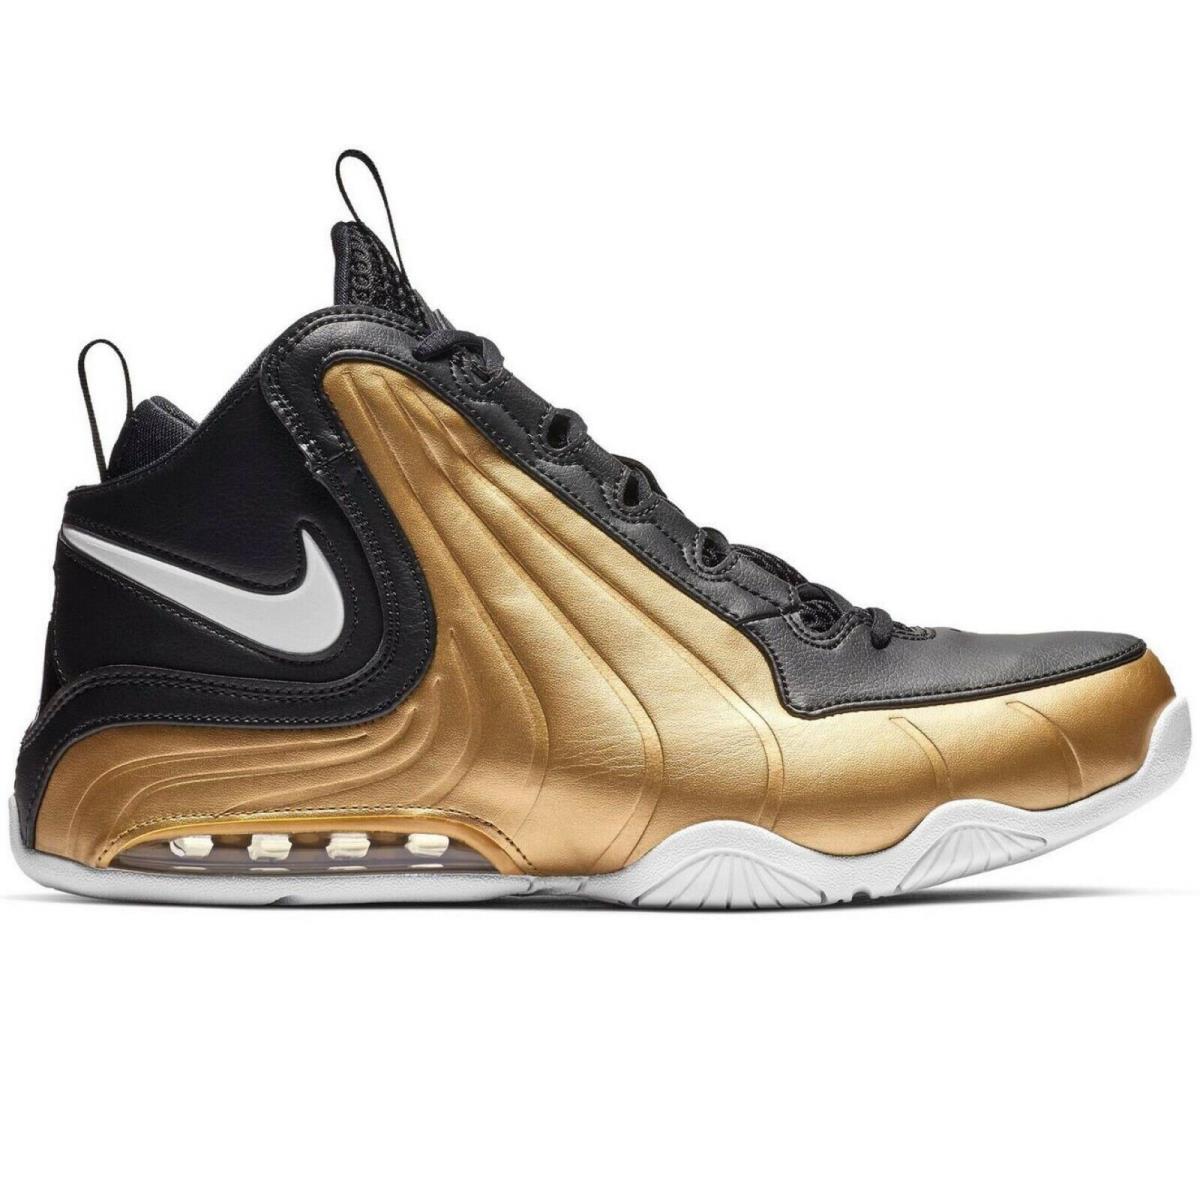 Nike Air Max Wavy Sneakers Men`s Shoes Basketball Training Running Black Gold 9